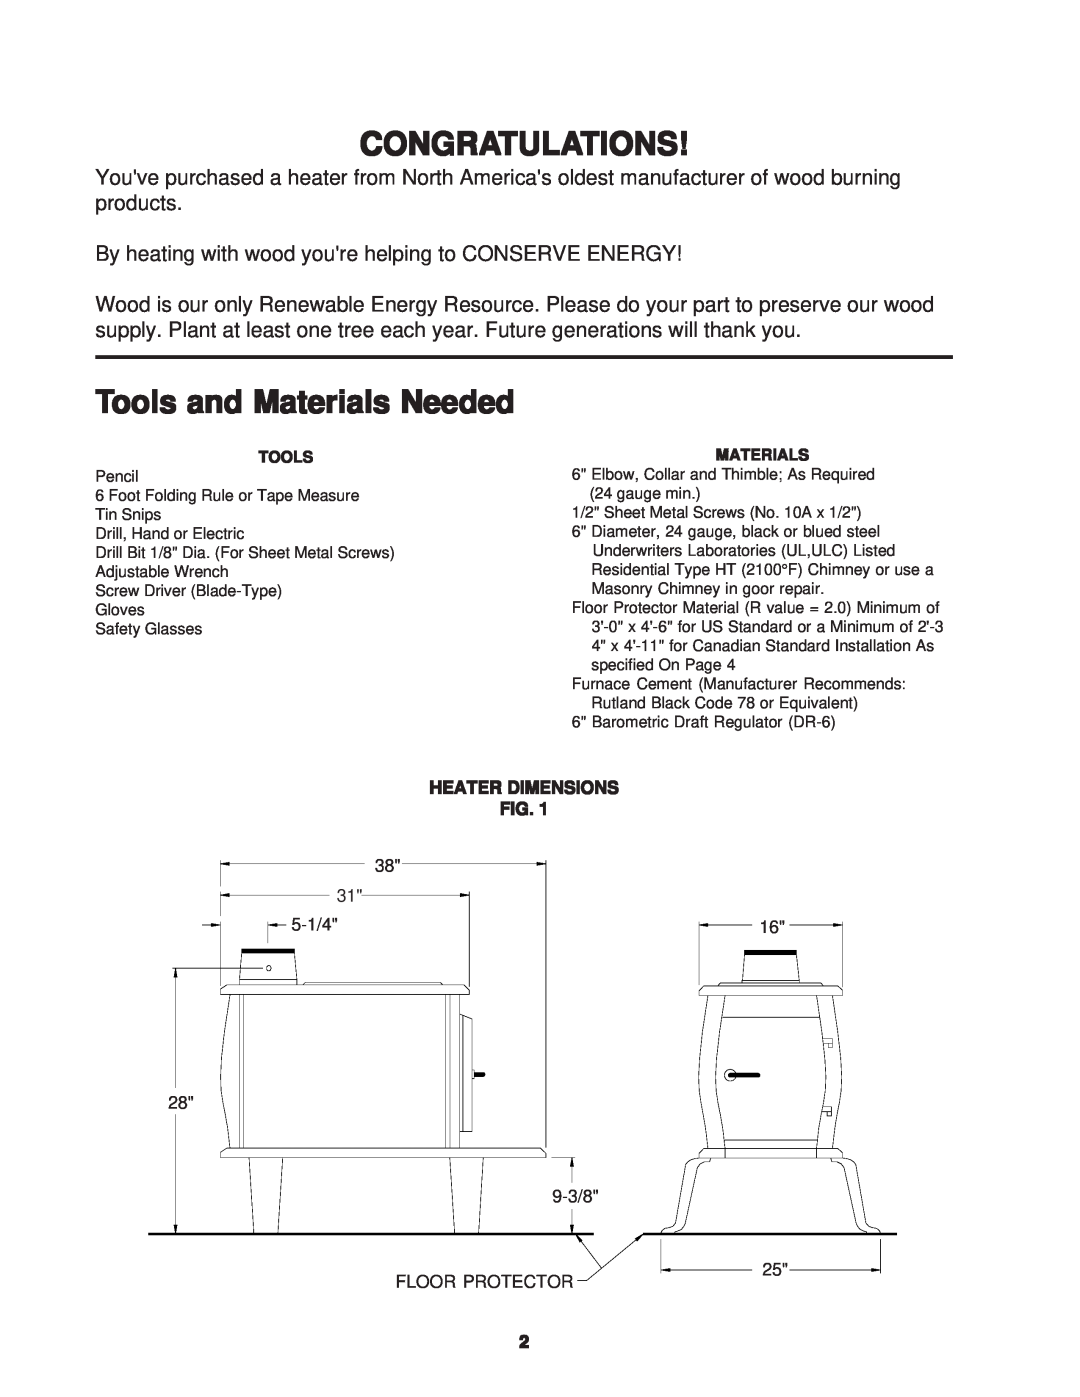 United States Stove C242 owner manual Congratulations, Tools and Materials Needed, Heater Dimensions 